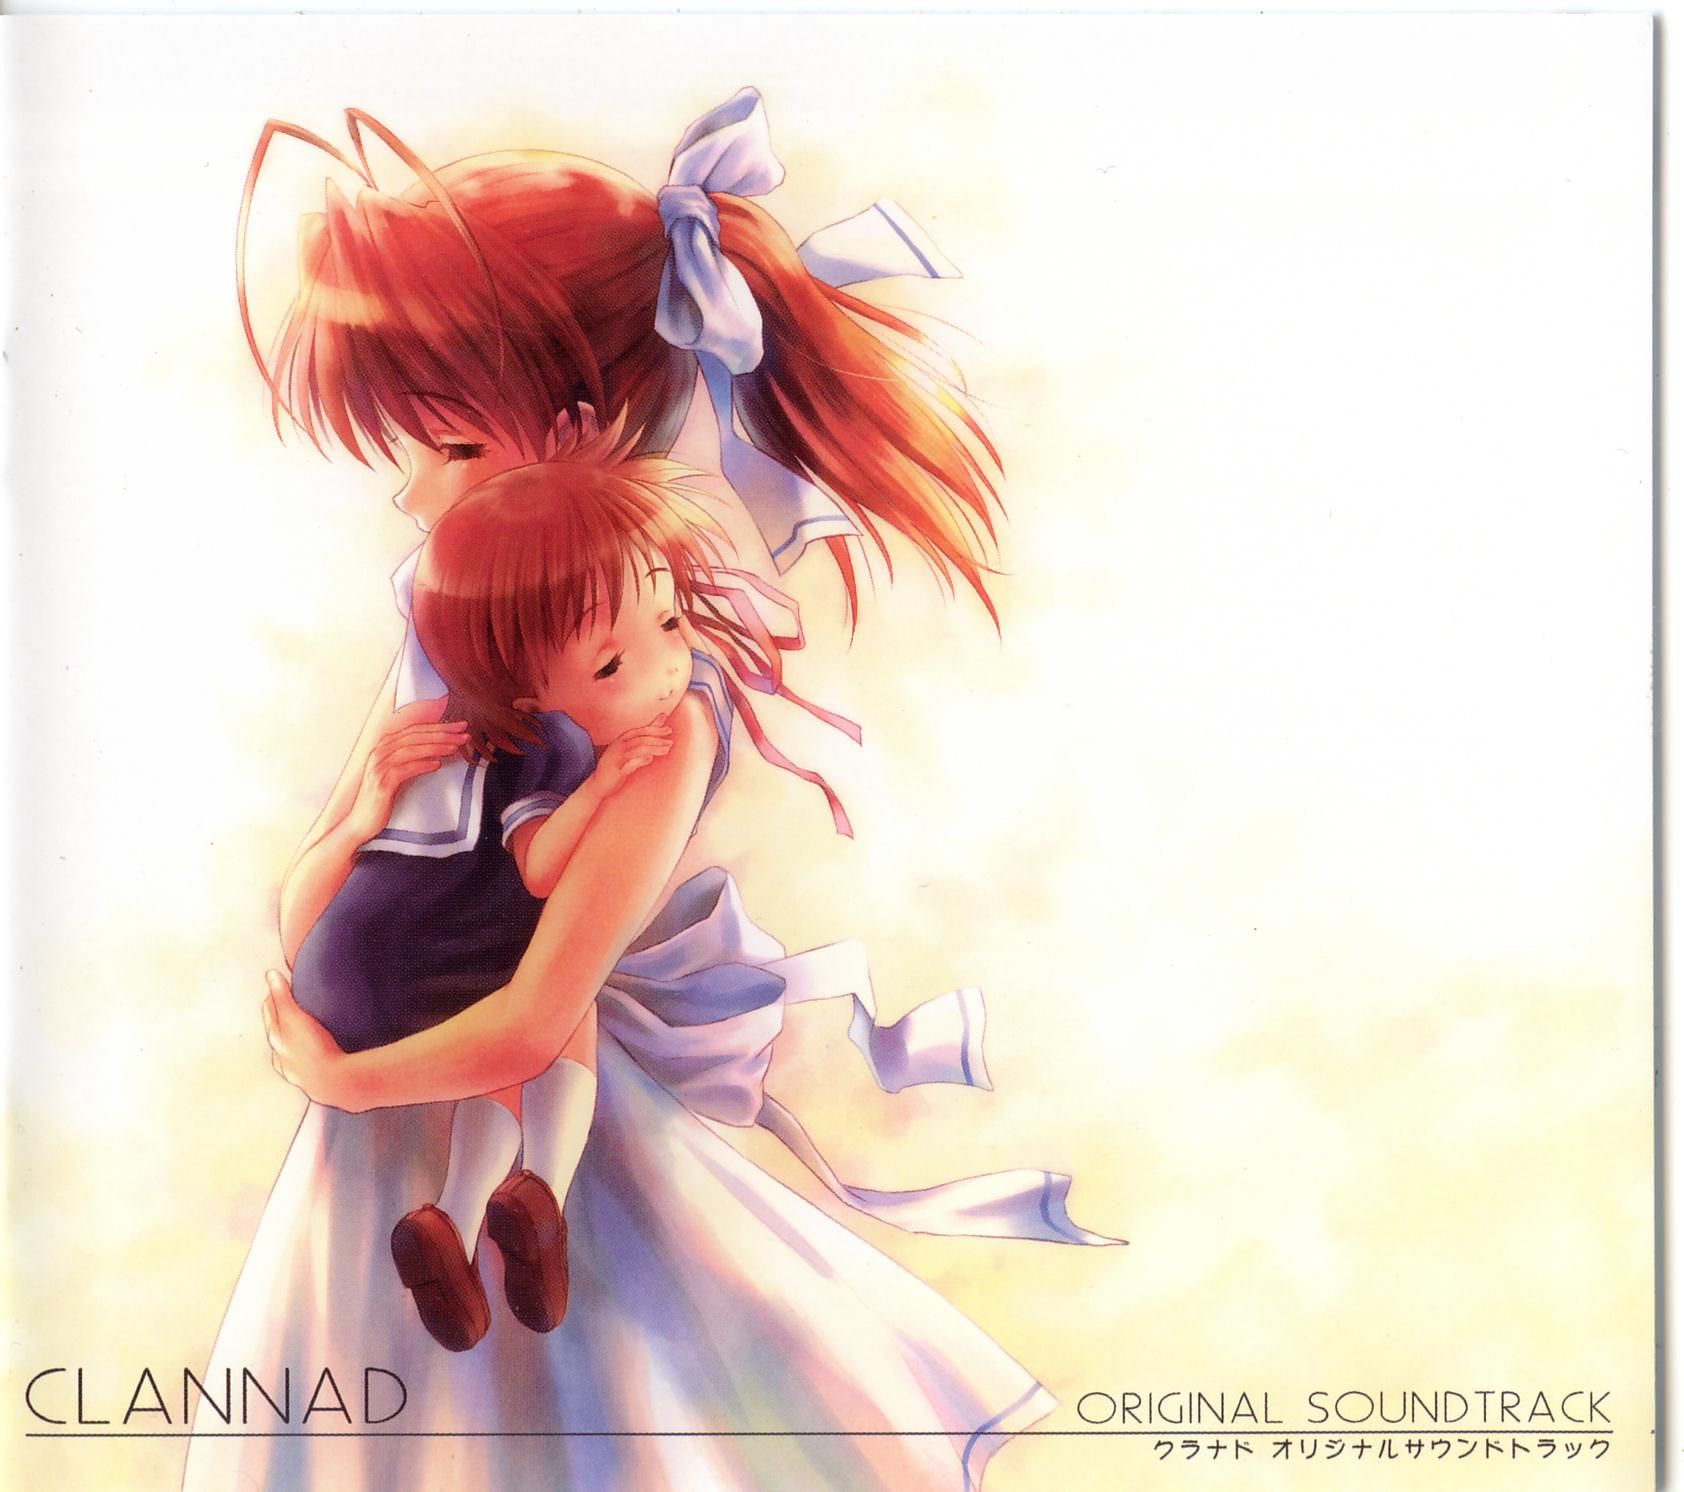 CLANNAD OST 1-17. 灰燼に帰す